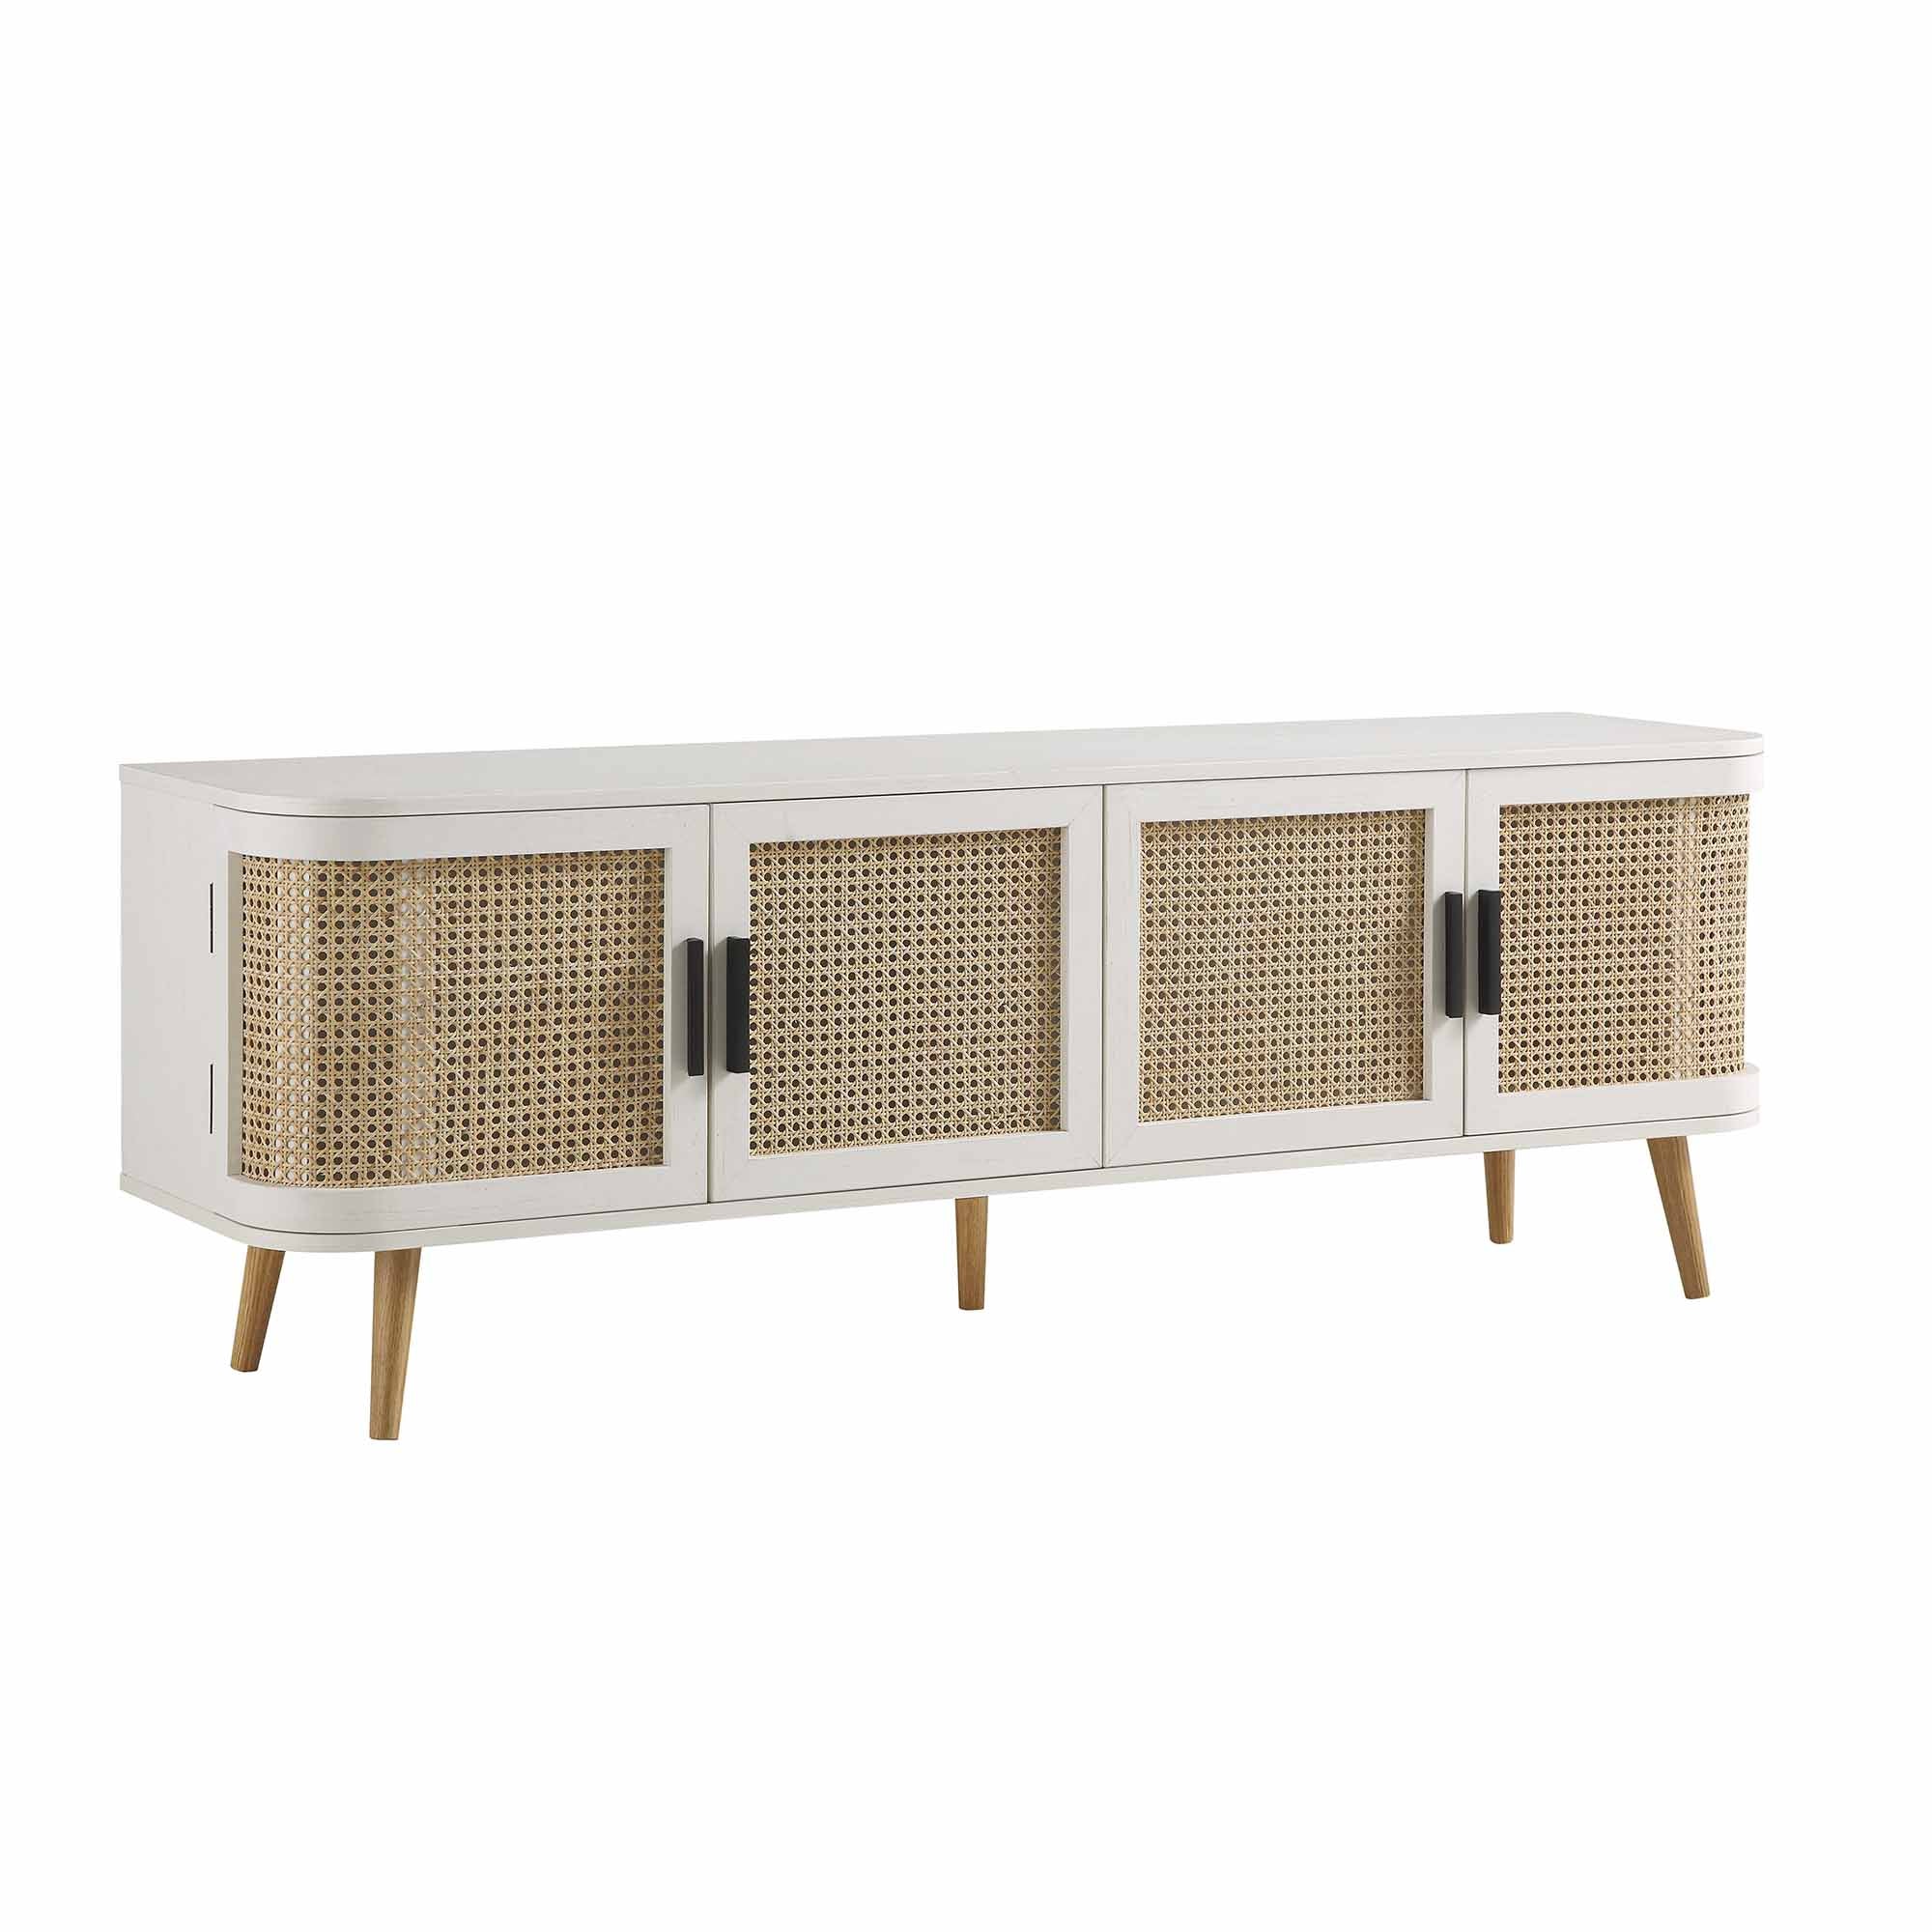 Izzy Curved Rattan 160cm Wide TV Unit, White